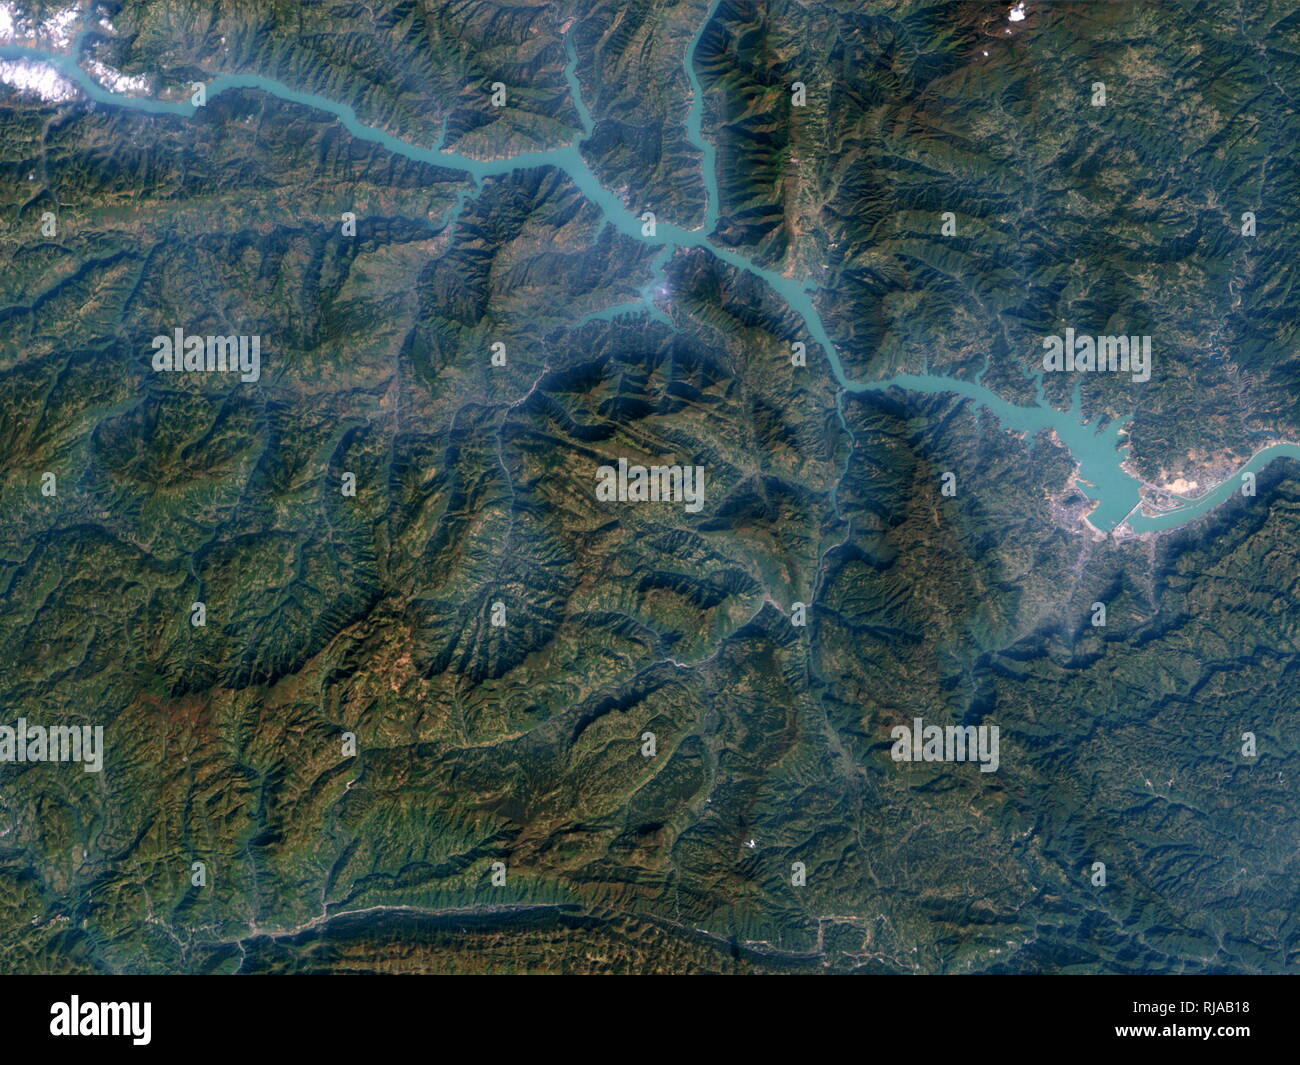 2006, Landsat-7 satellite photograph, of the Three Gorges Dam, China. The Three Gorges Dam is a hydroelectric gravity dam that spans the Yangtze River in Yichang, Hubei province, China. The Three Gorges Dam is the world's largest power station and was completed in 2012 Stock Photo